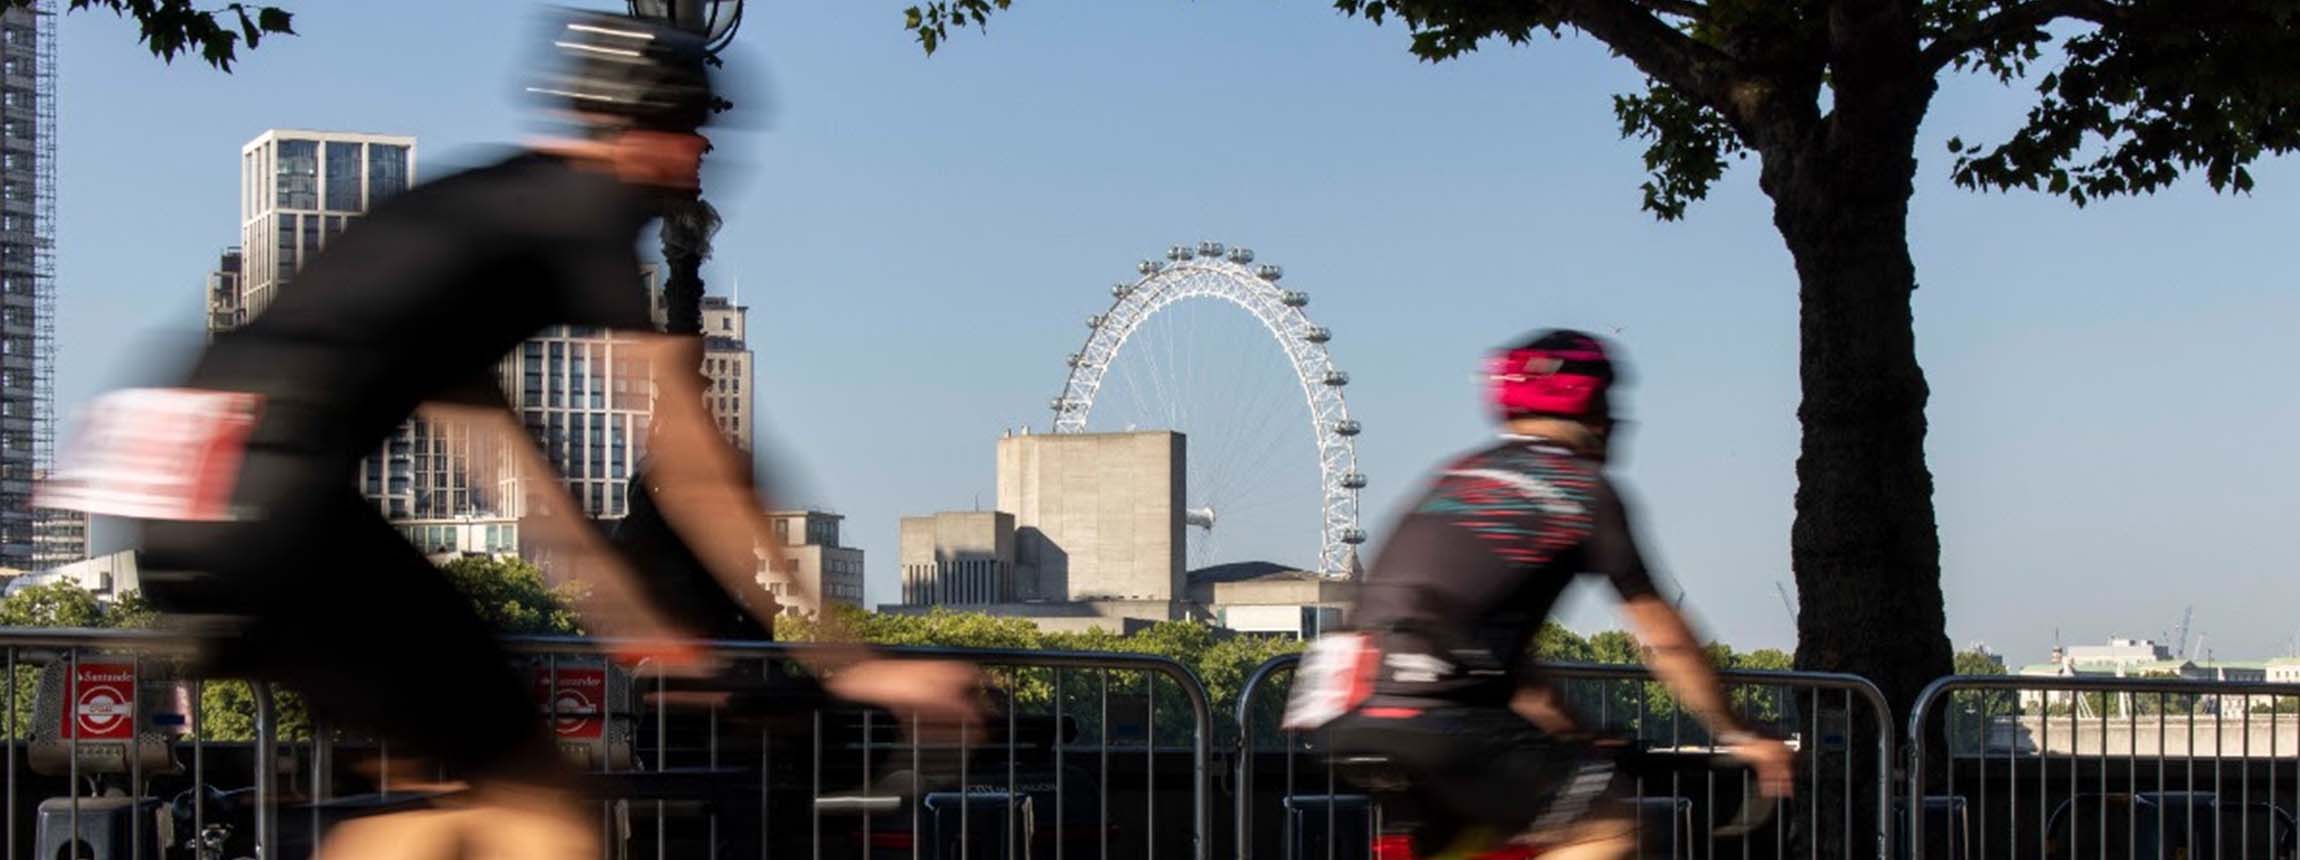 Blurred cyclists in view of london eye